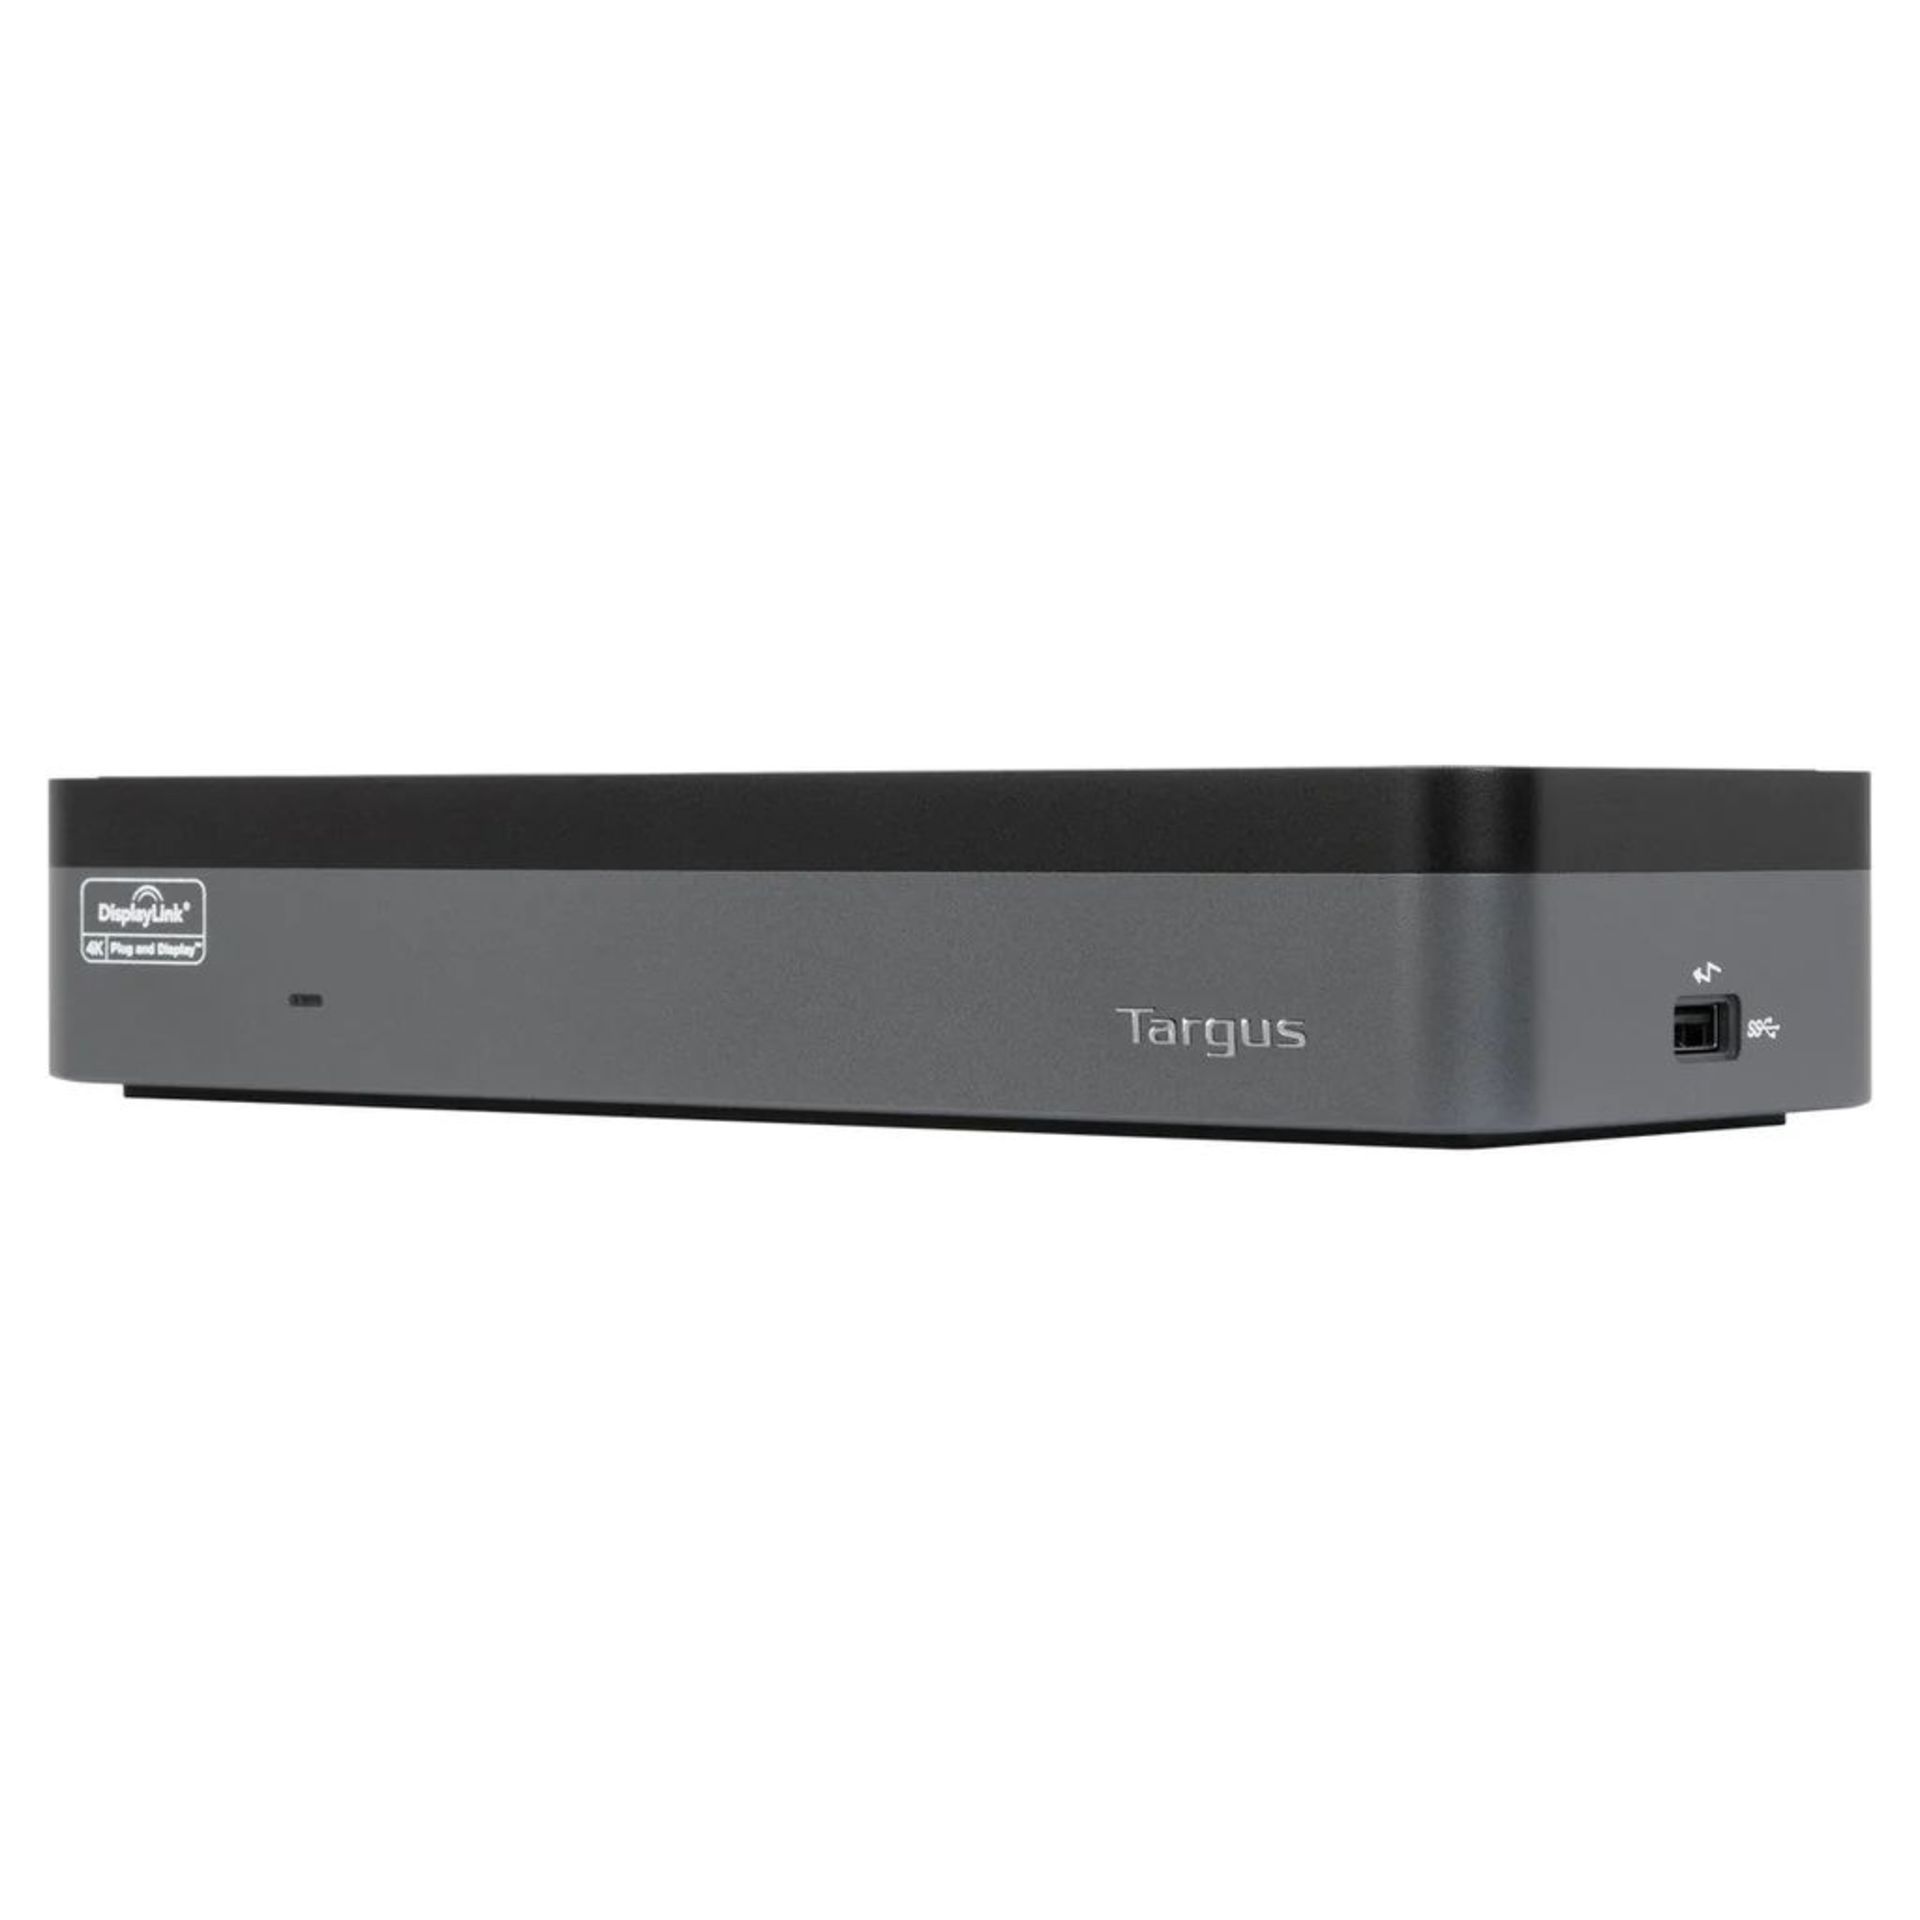 NEW & BOXED TARGUS Four Head 4K Dock With 100w Docking Station (DOCK570EUZ-82). RRP £351.89. Boost - Image 2 of 7